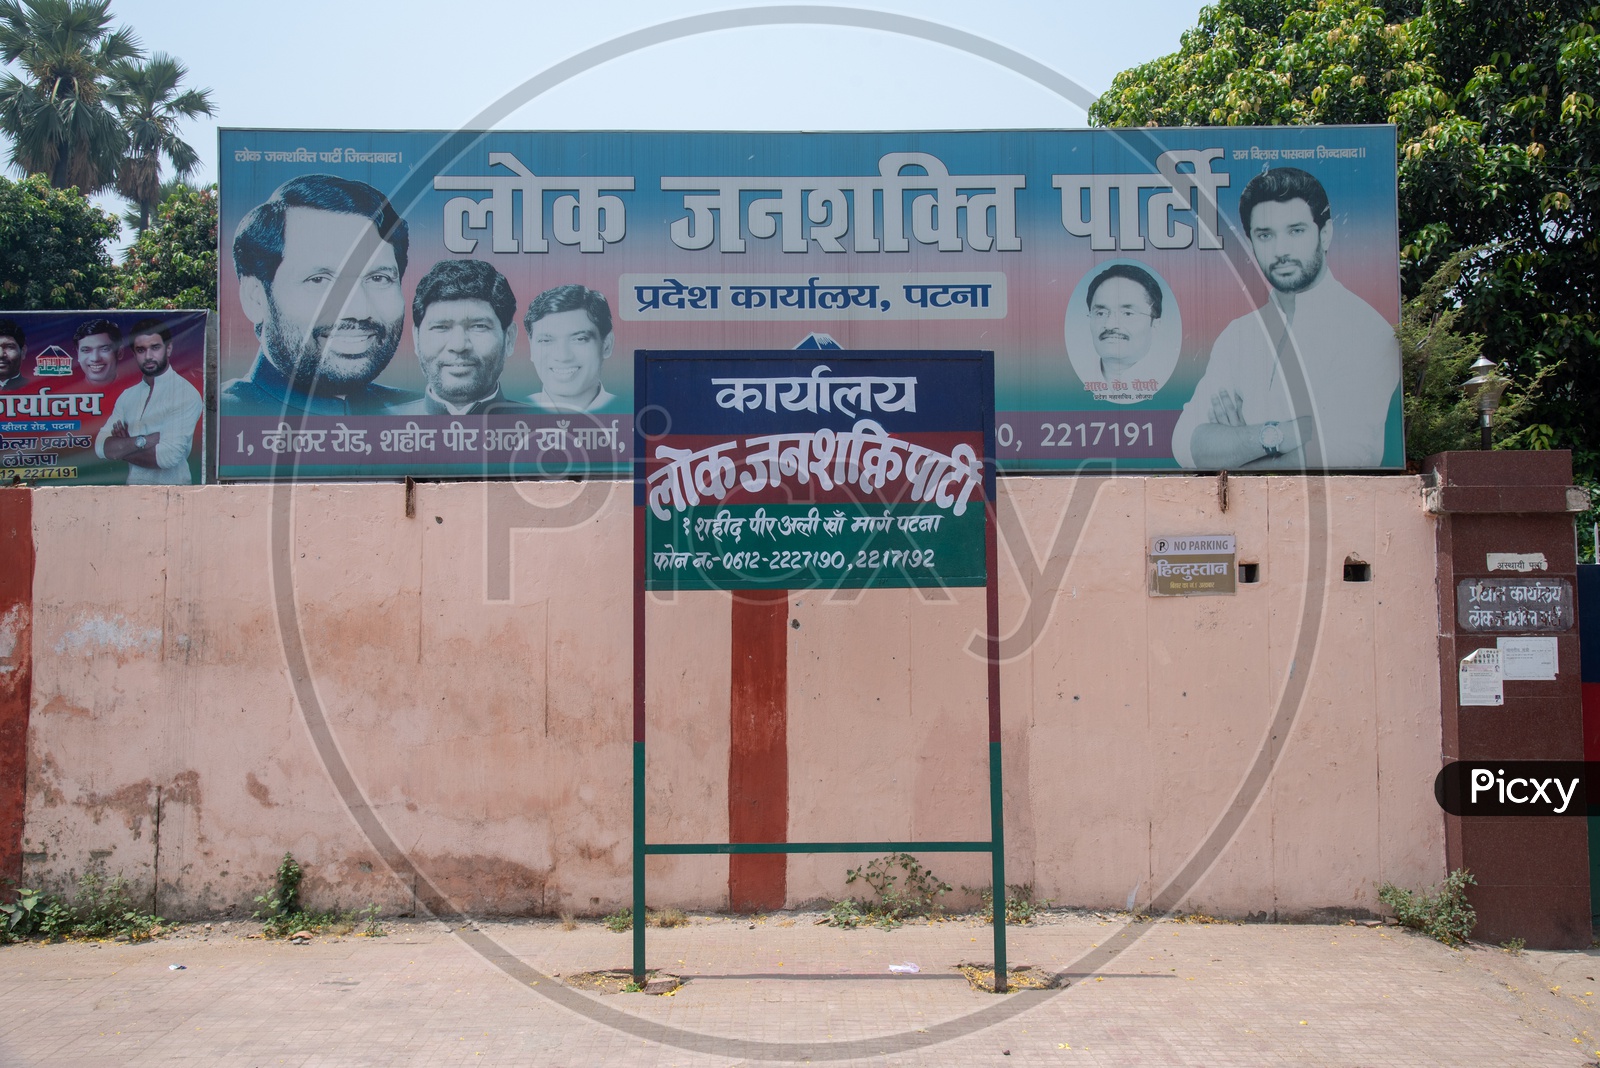 Office of  Lok Jana Shakthi Party  ,  Local Political Party in Bihar State